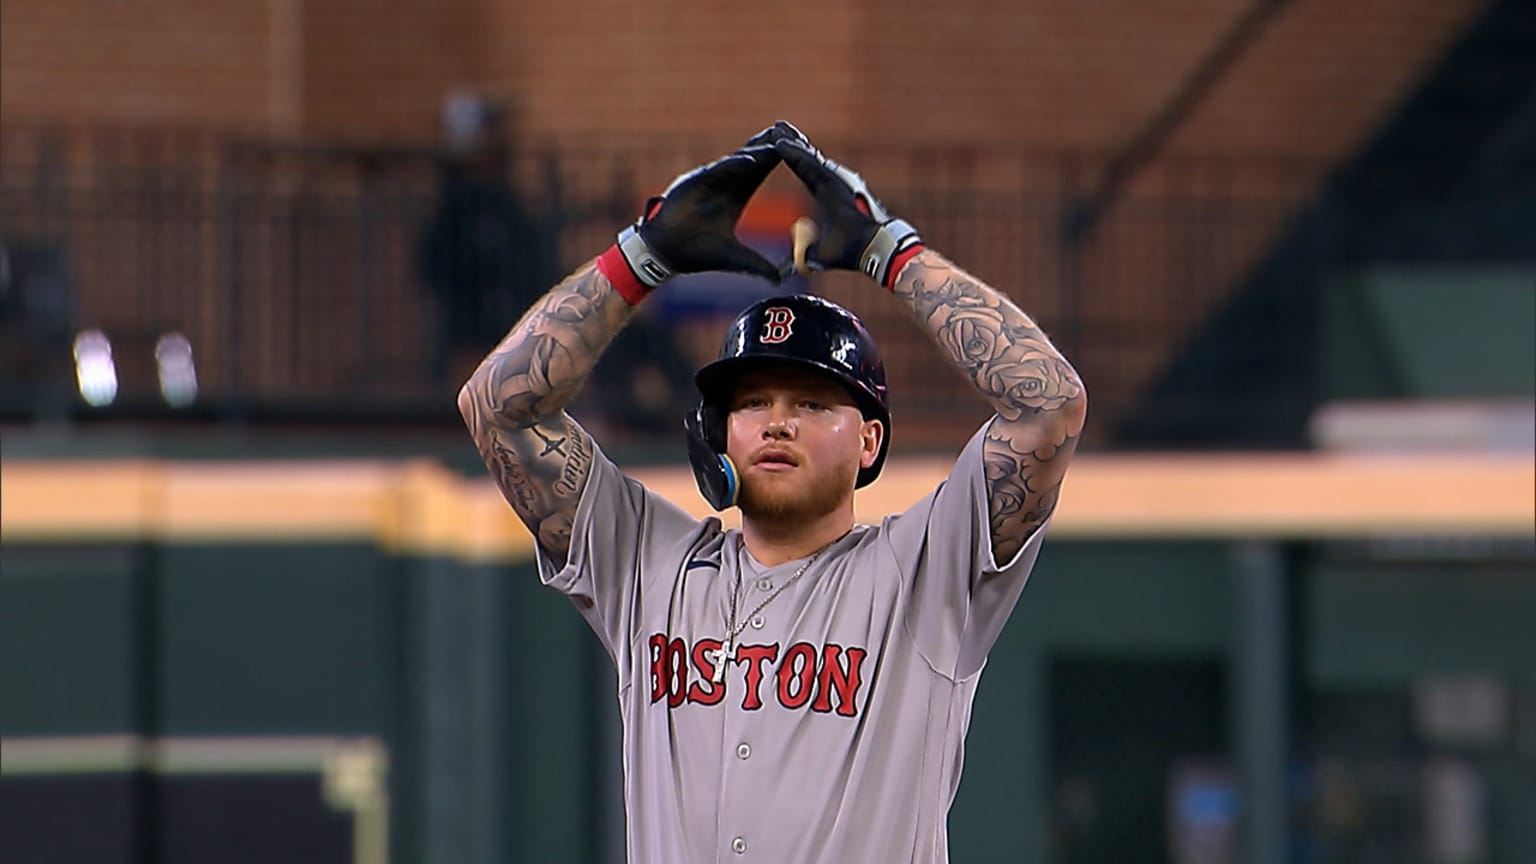 Alex Verdugo drives in 2 runs in the Red Sox's 4-3 victory over the Royals  - The San Diego Union-Tribune